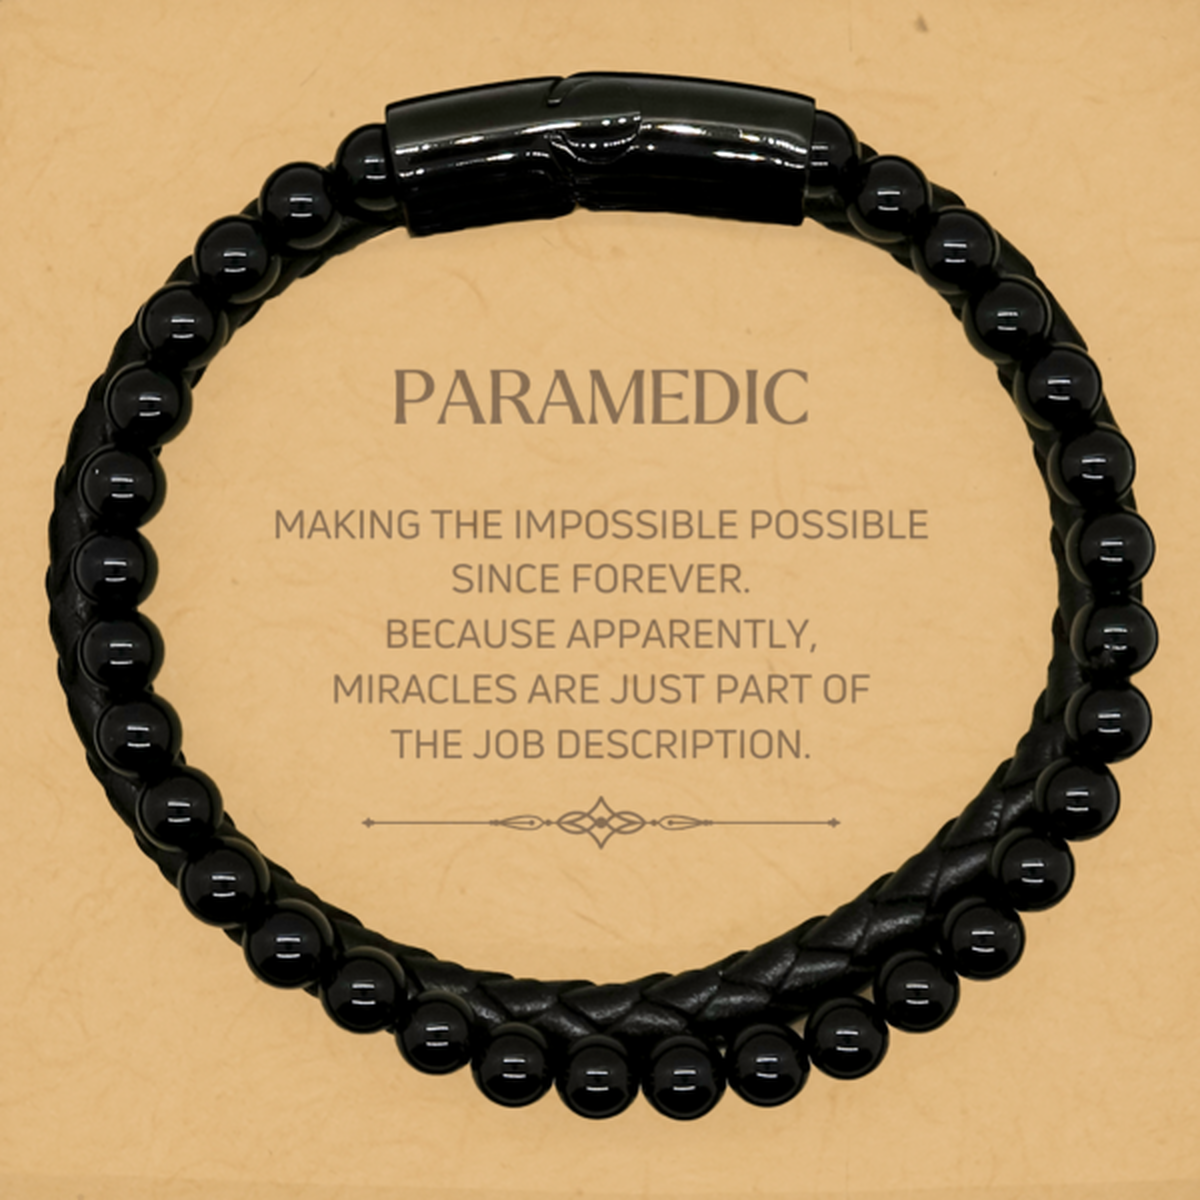 Funny Paramedic Gifts, Miracles are just part of the job description, Inspirational Birthday Stone Leather Bracelets For Paramedic, Men, Women, Coworkers, Friends, Boss